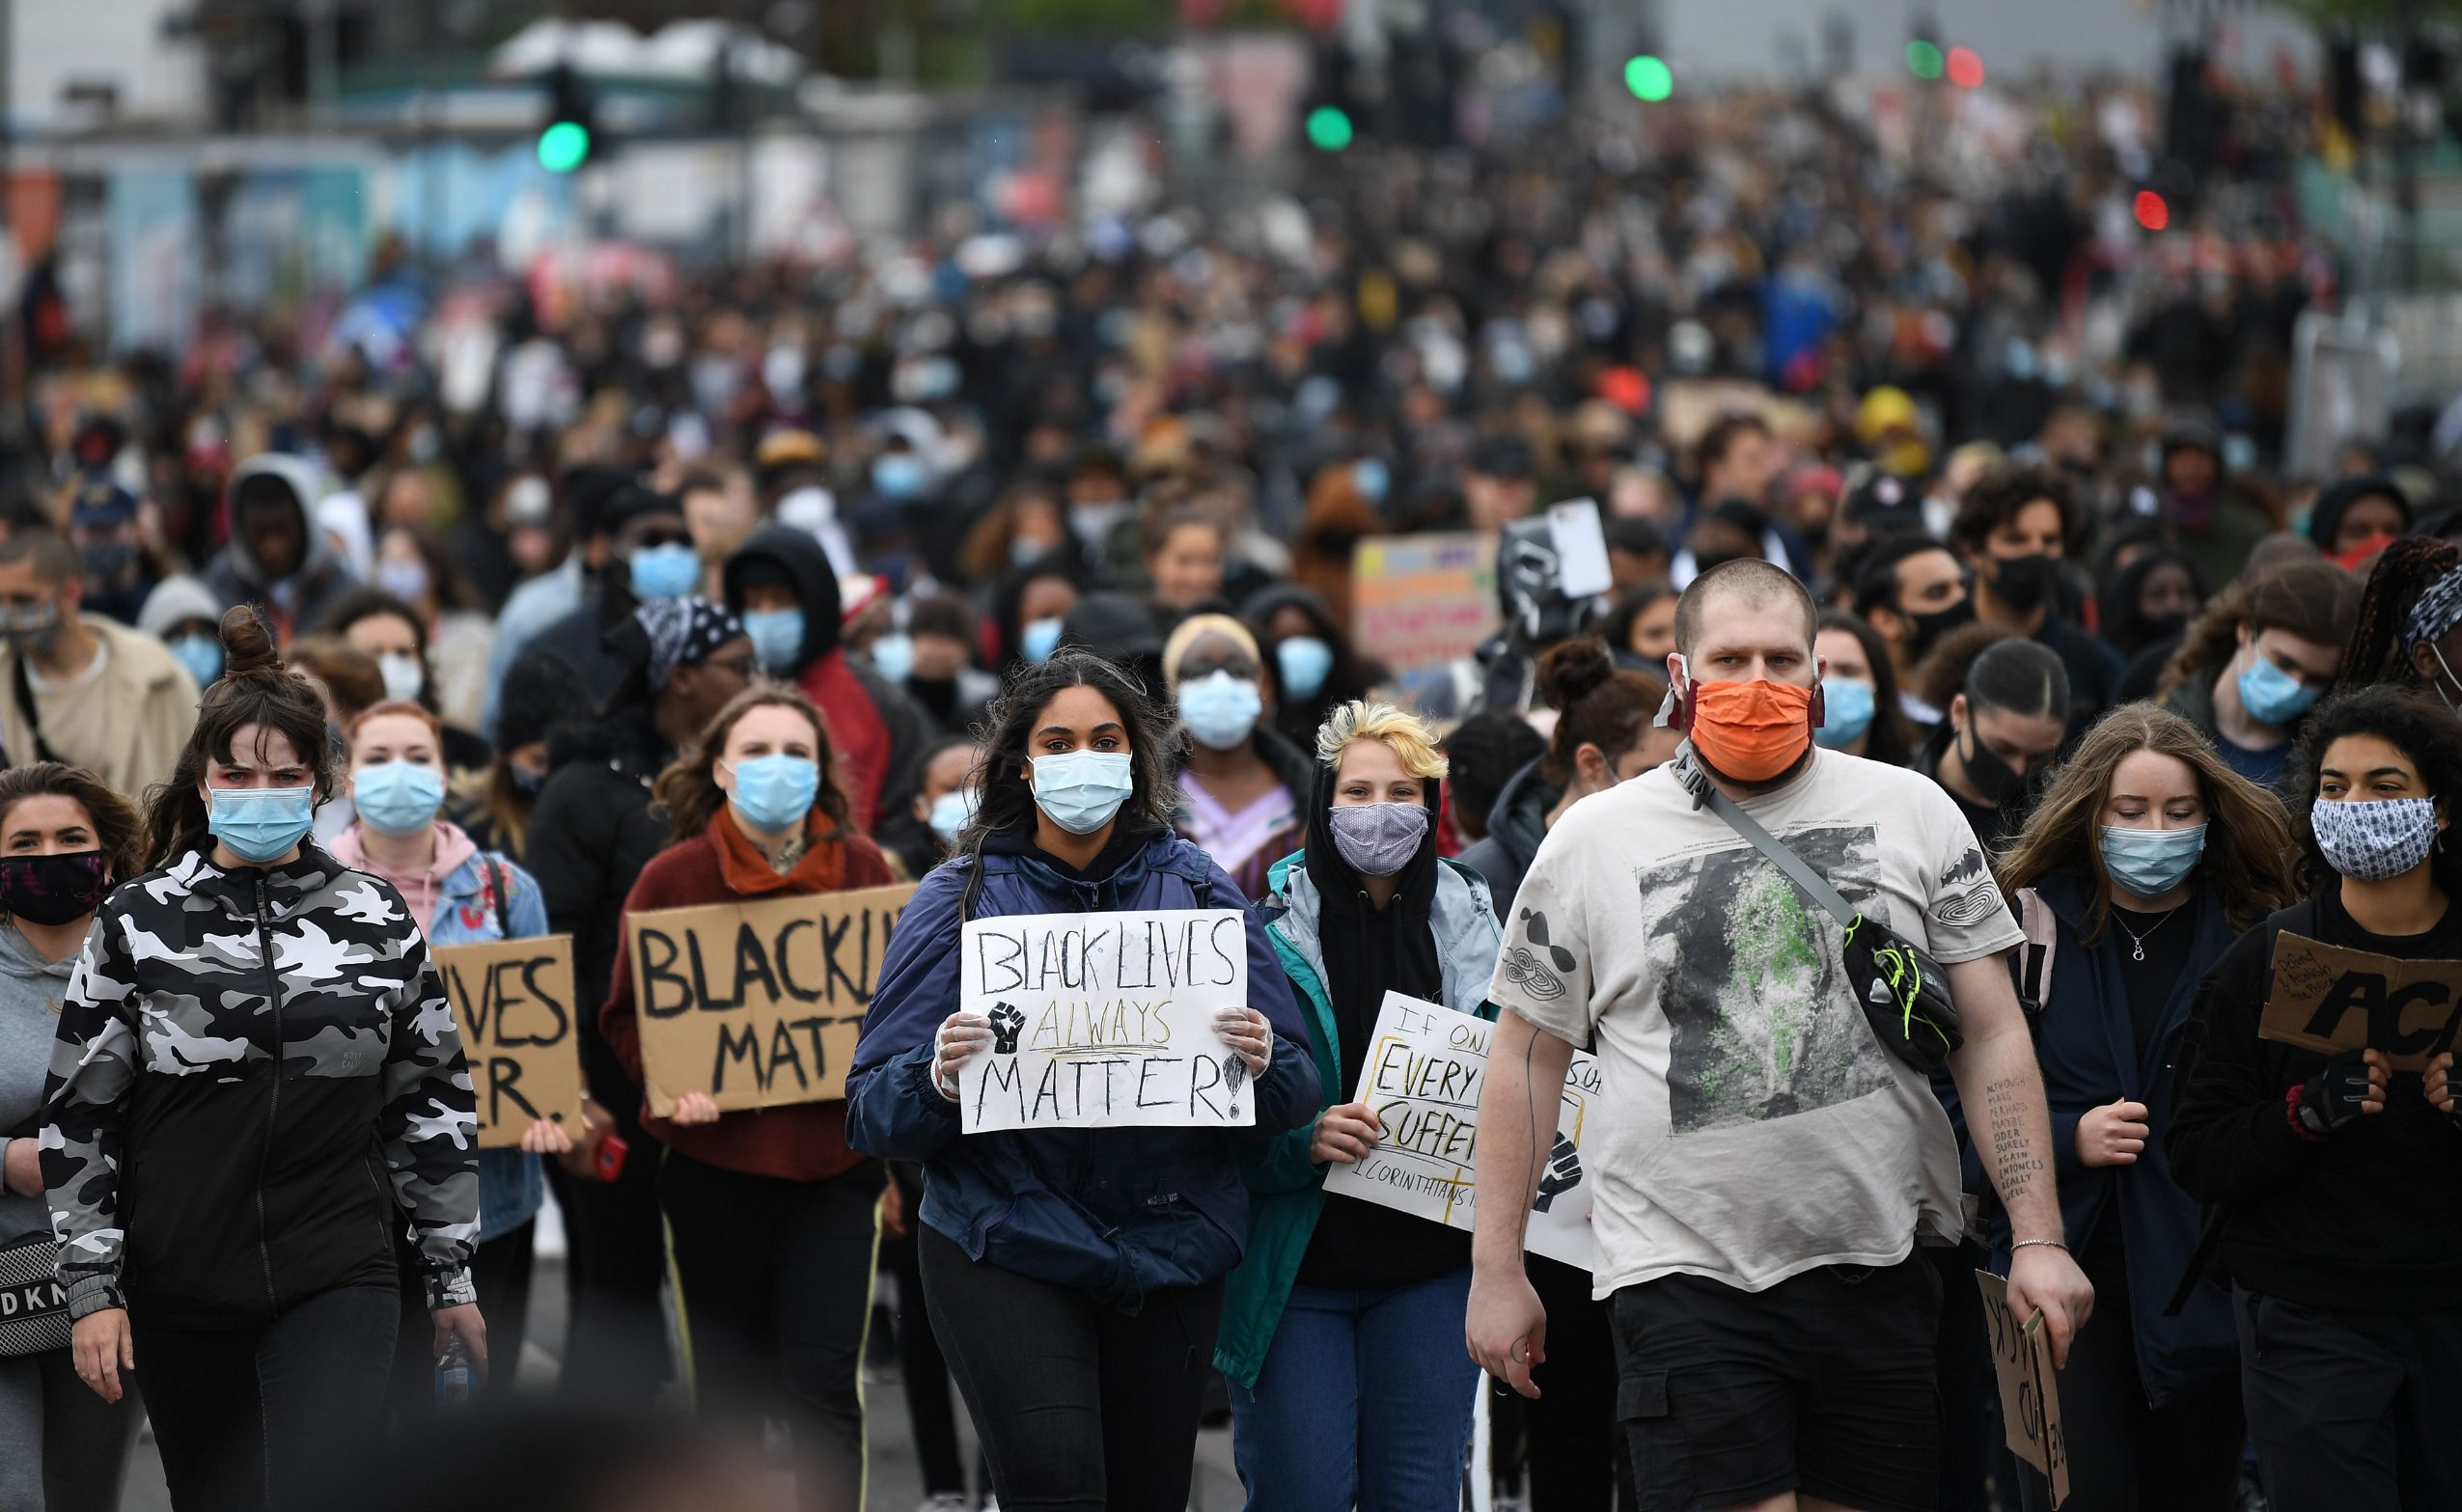 Demonstrators, some wearing PPE (personal protective equipment), including a face mask as a precautionary measure against COVID-19,  hold placards as they attend a protest march to the US Embassy in London on June 6, 2020, to show solidarity with the Black Lives Matter movement in the wake of the killing of George Floyd, an unarmed black man who died after a police officer knelt on his neck in Minneapolis. - The United States braced Friday for massive weekend protests against racism and police brutality, as outrage soared over the latest law enforcement abuses against demonstrators that were caught on camera. With protests over last week's police killing of George Floyd, an unarmed black man, surging into a second weekend, President Donald Trump sparked fresh controversy by saying it was a 